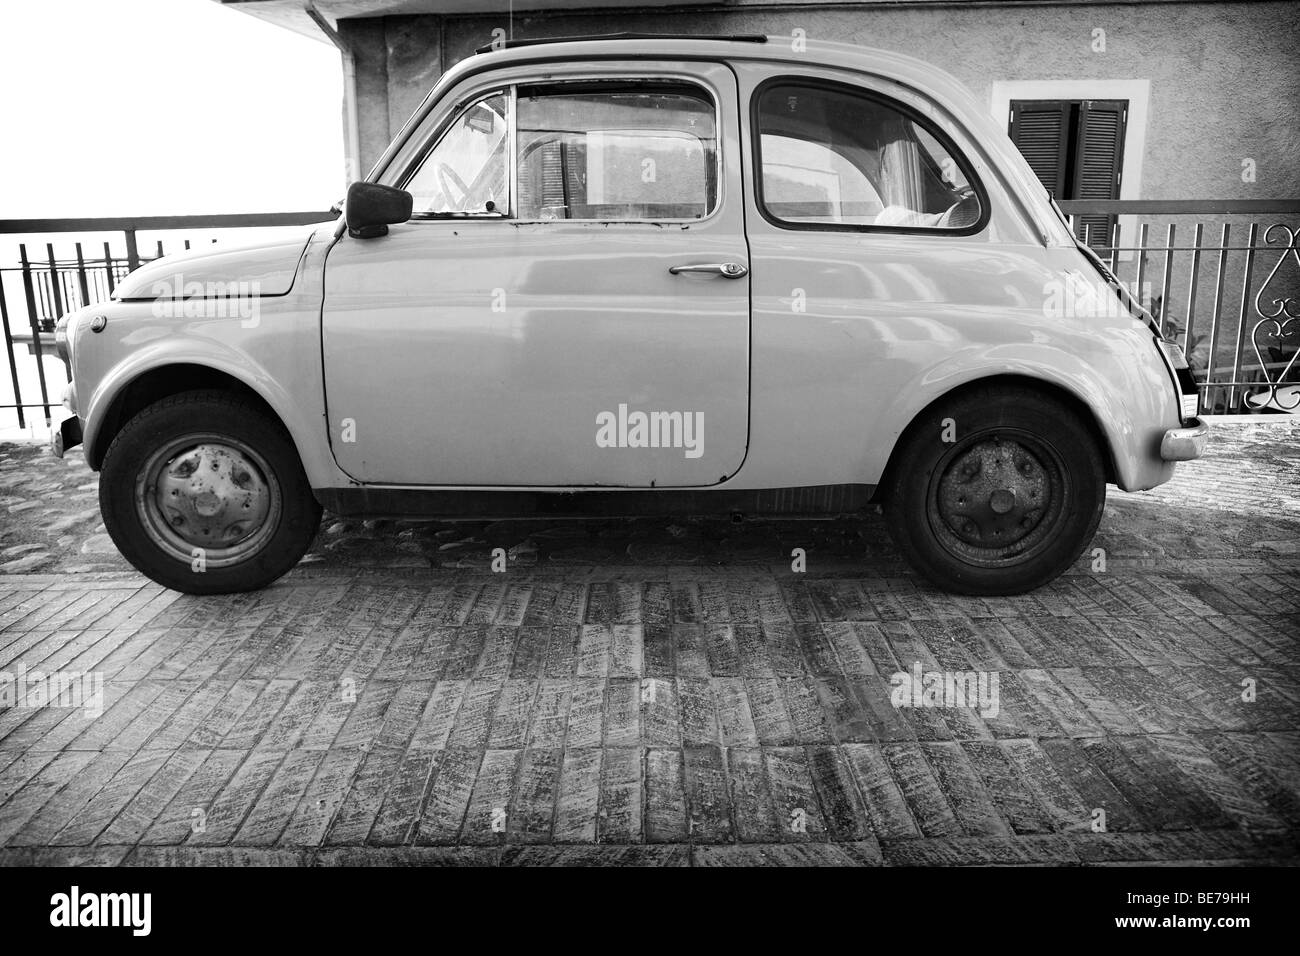 Old italy car Black and White Stock Photos & Images - Alamy